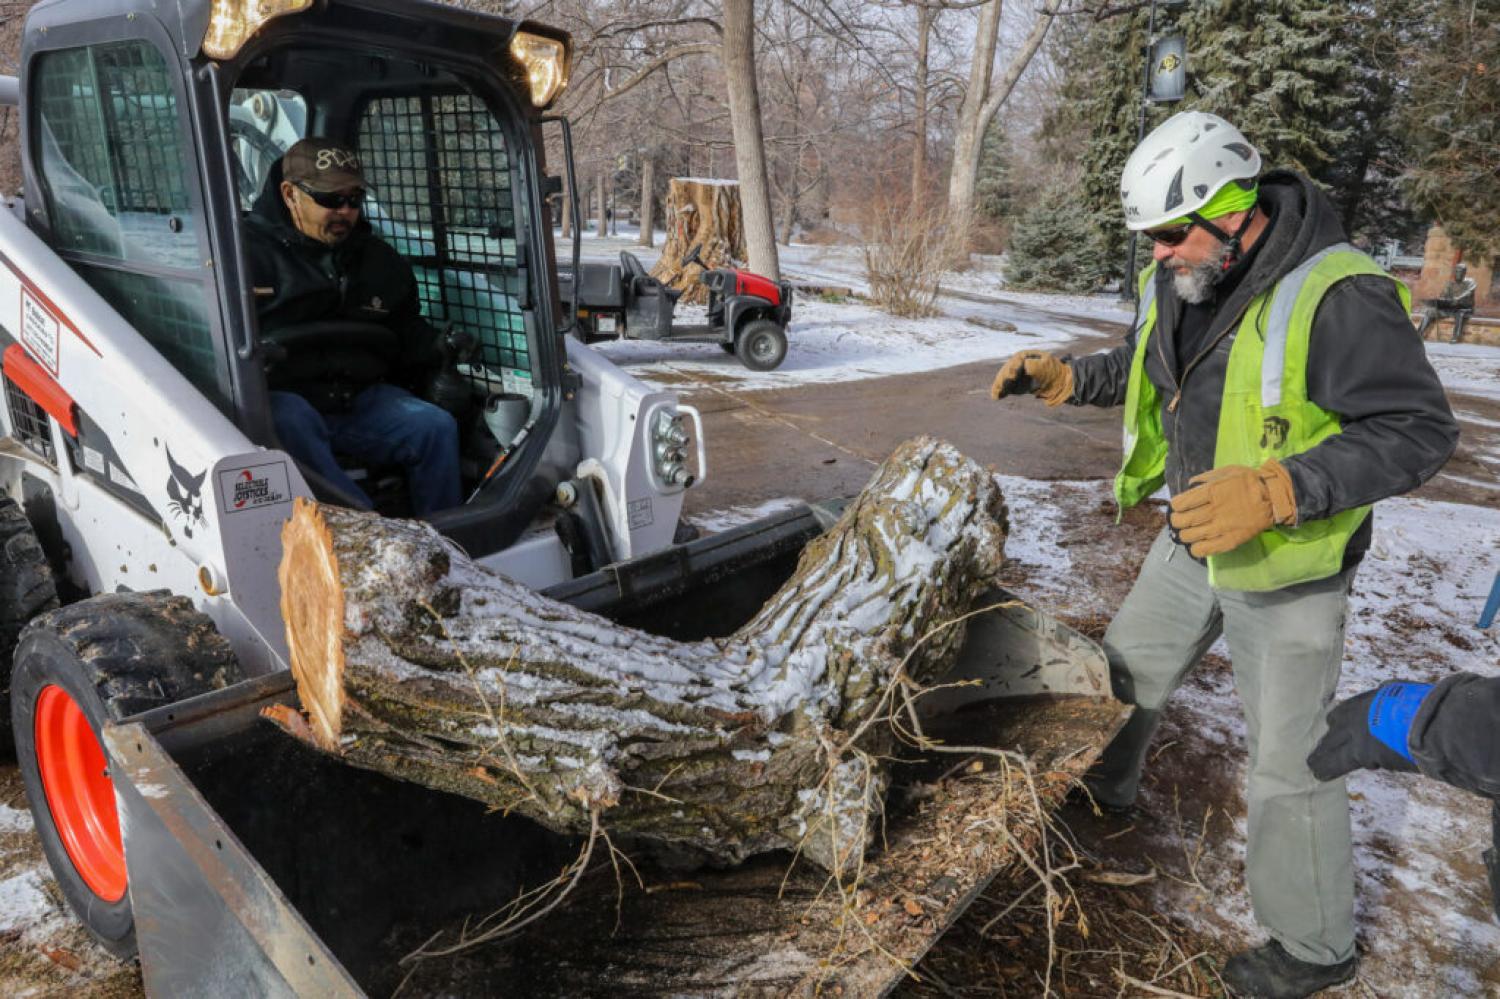 Vince Aquino, CU Boulder forestry supervisor, helps maneuver a limb from the “Old Main Cottonwood” into the bucket of a Bobcat driven by Craig Ogata on Thursday, Jan. 20, 2022.